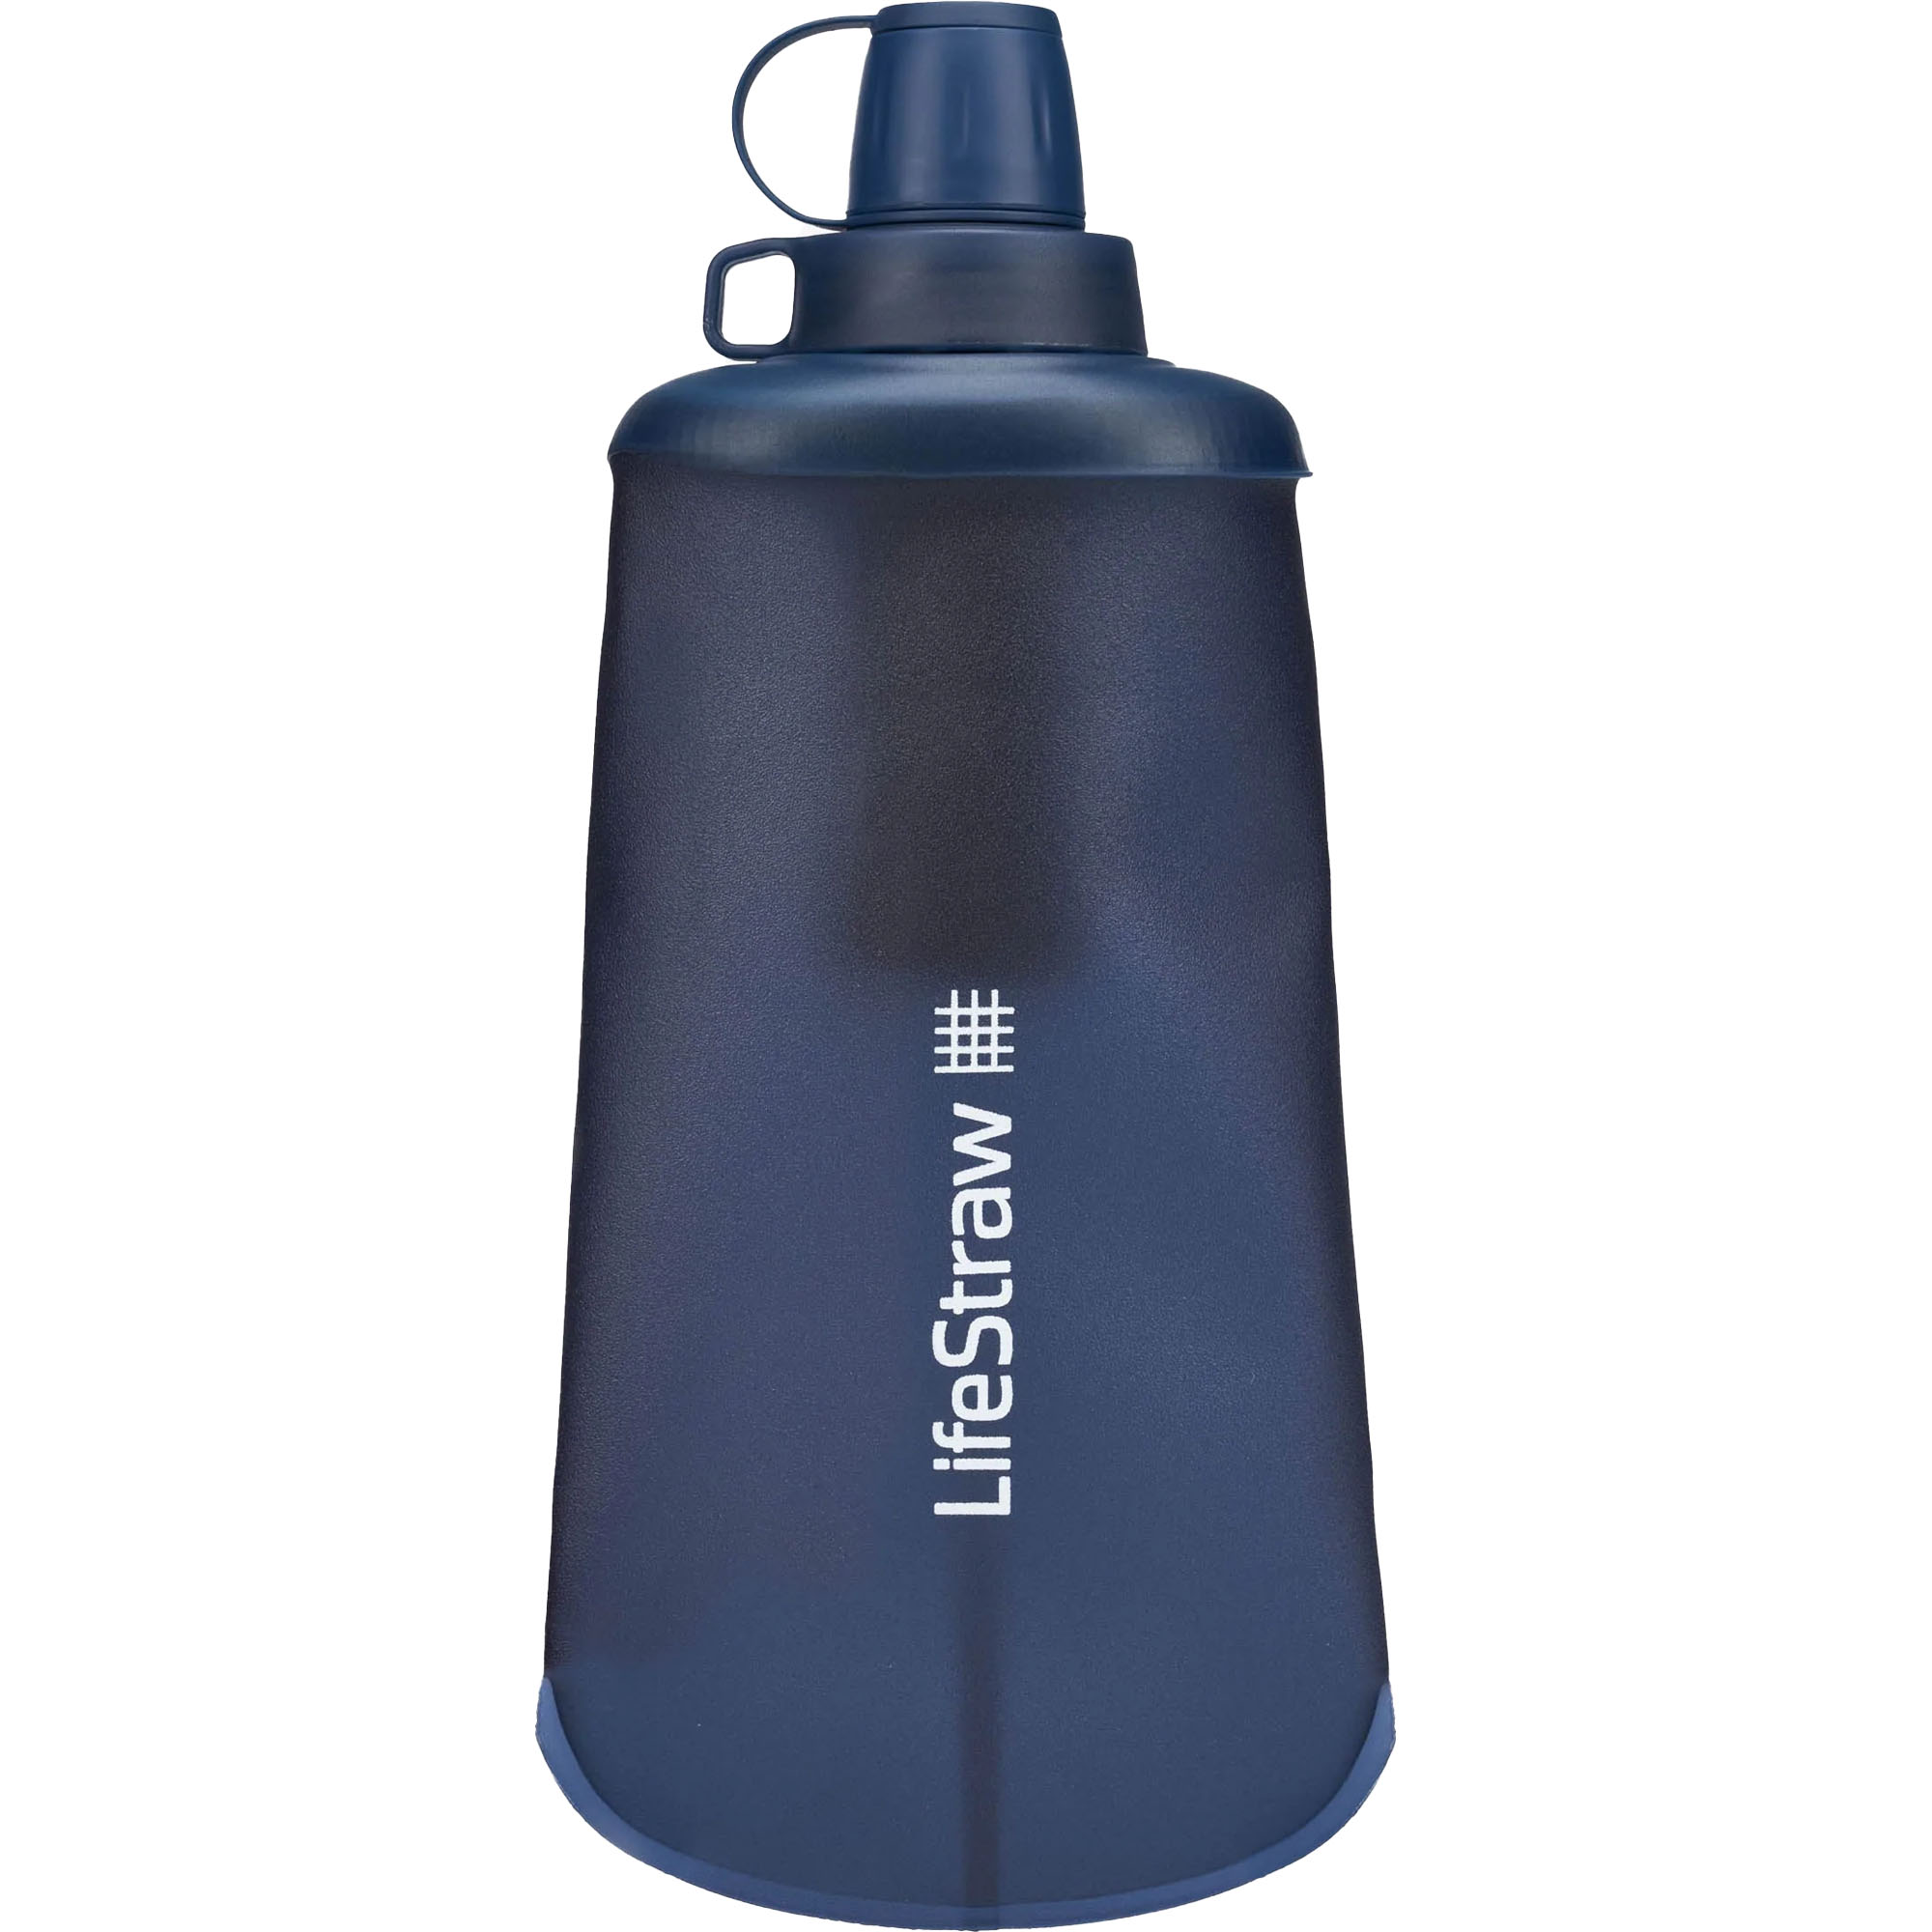 Lifestraw Peak Series 650ml Collapsible Water Bottle With Filter